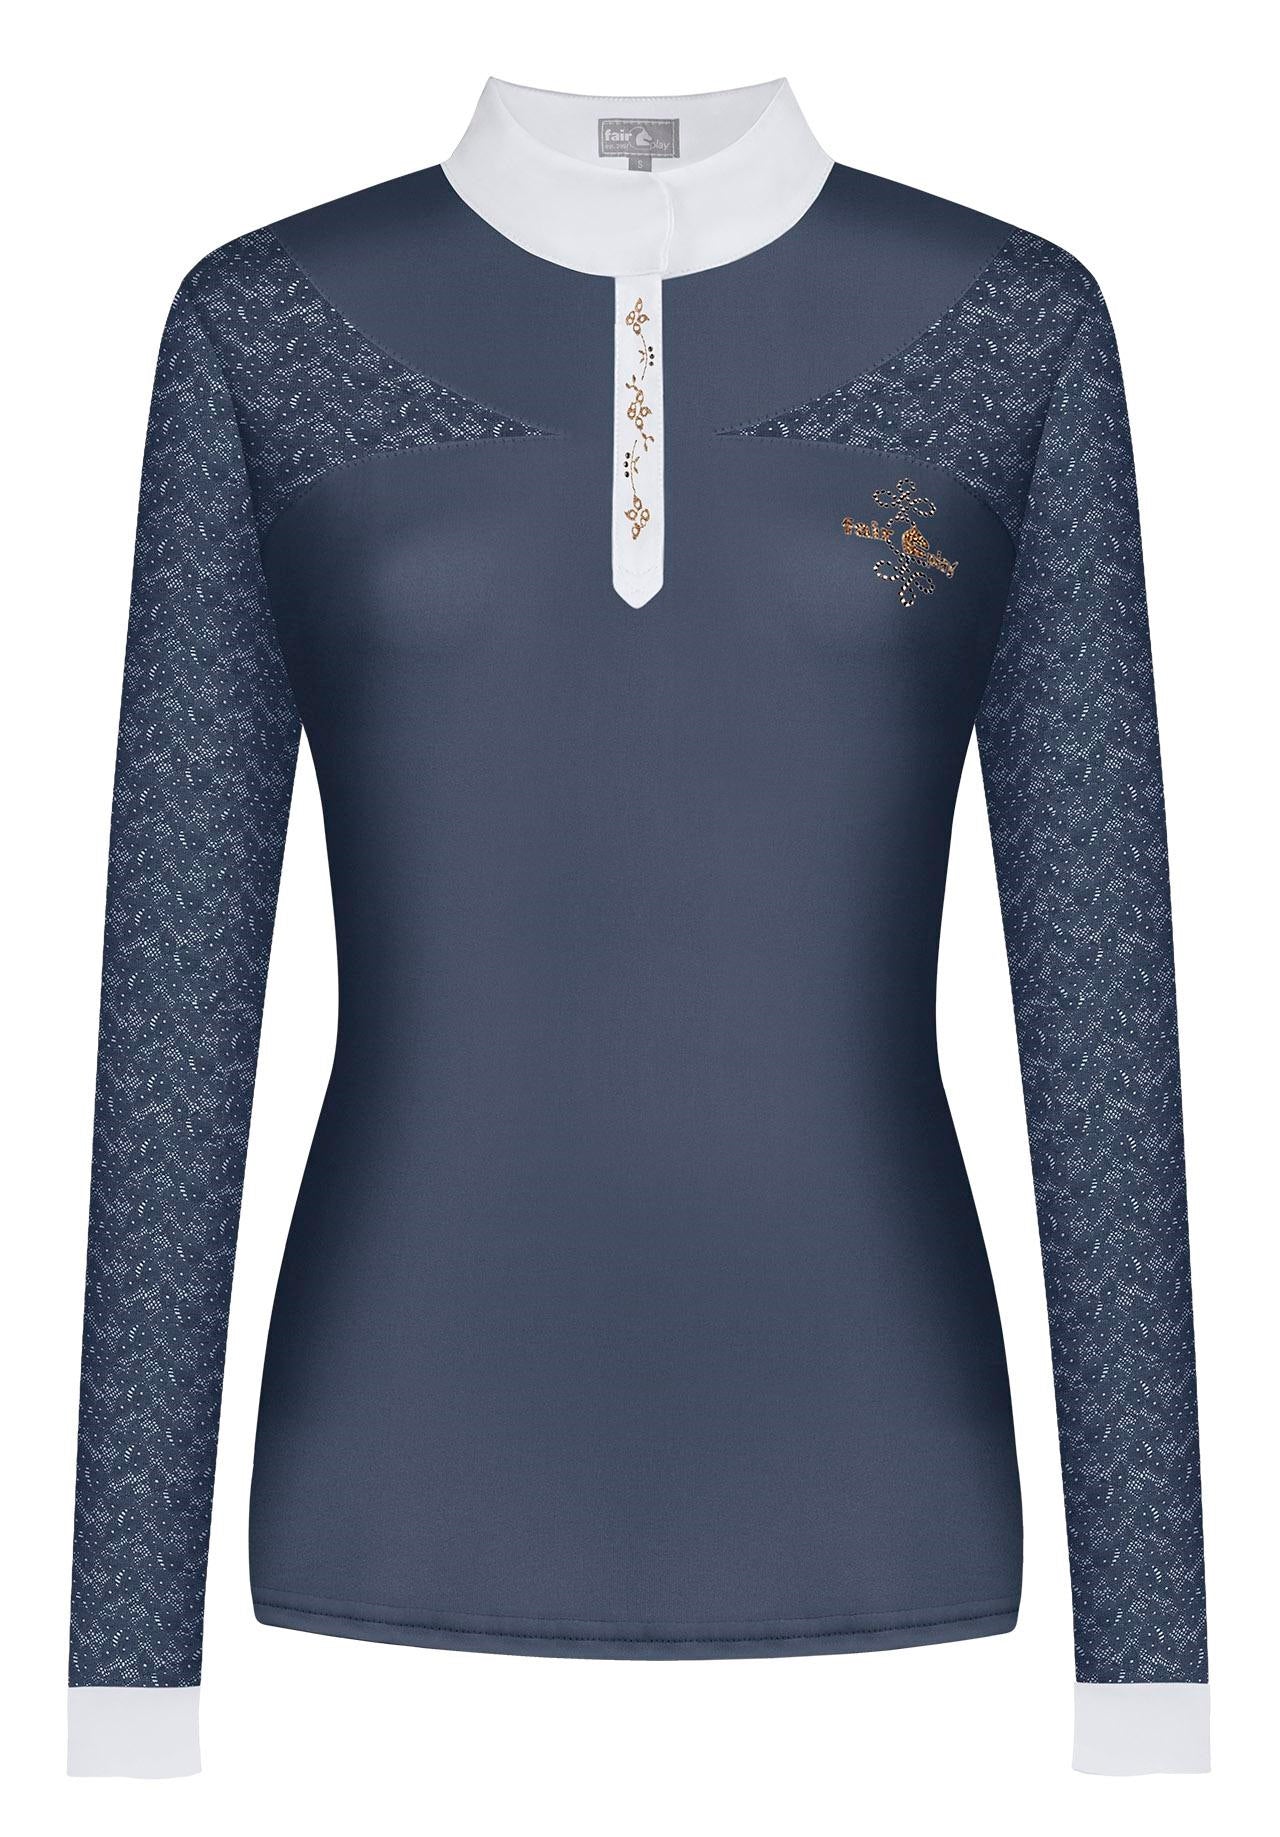 Alexis long sleeve Rosegold FairPlay competition shirt